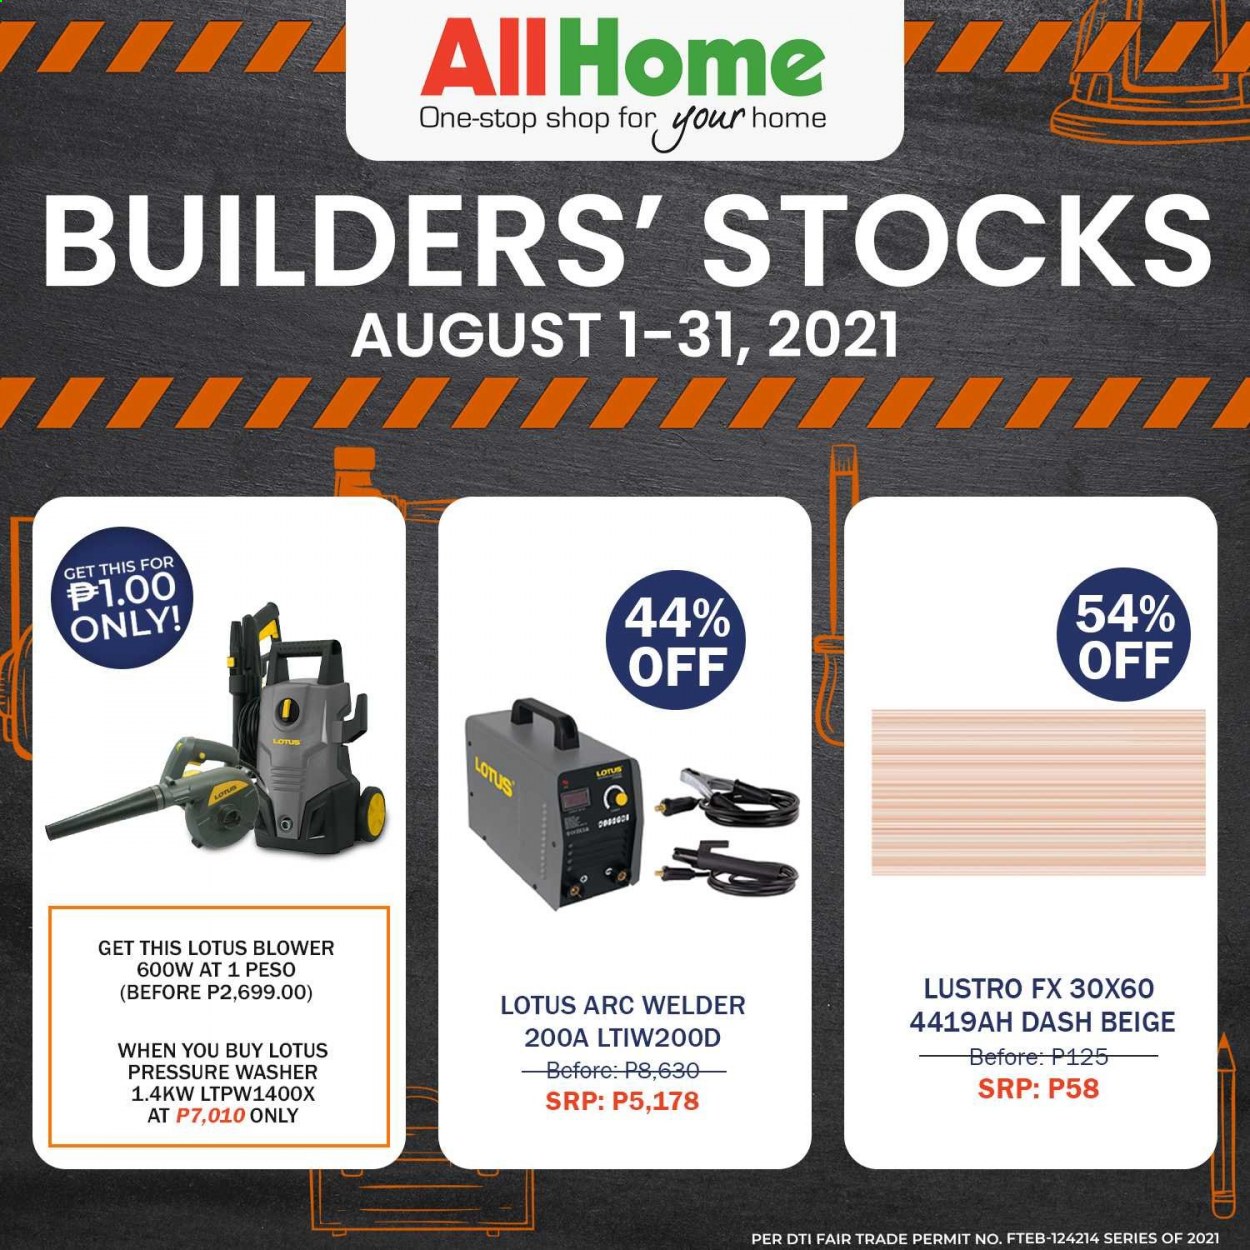 thumbnail - AllHome offer  - 1.8.2021 - 31.8.2021 - Sales products - washing machine, Lotus, blower, welder. Page 1.